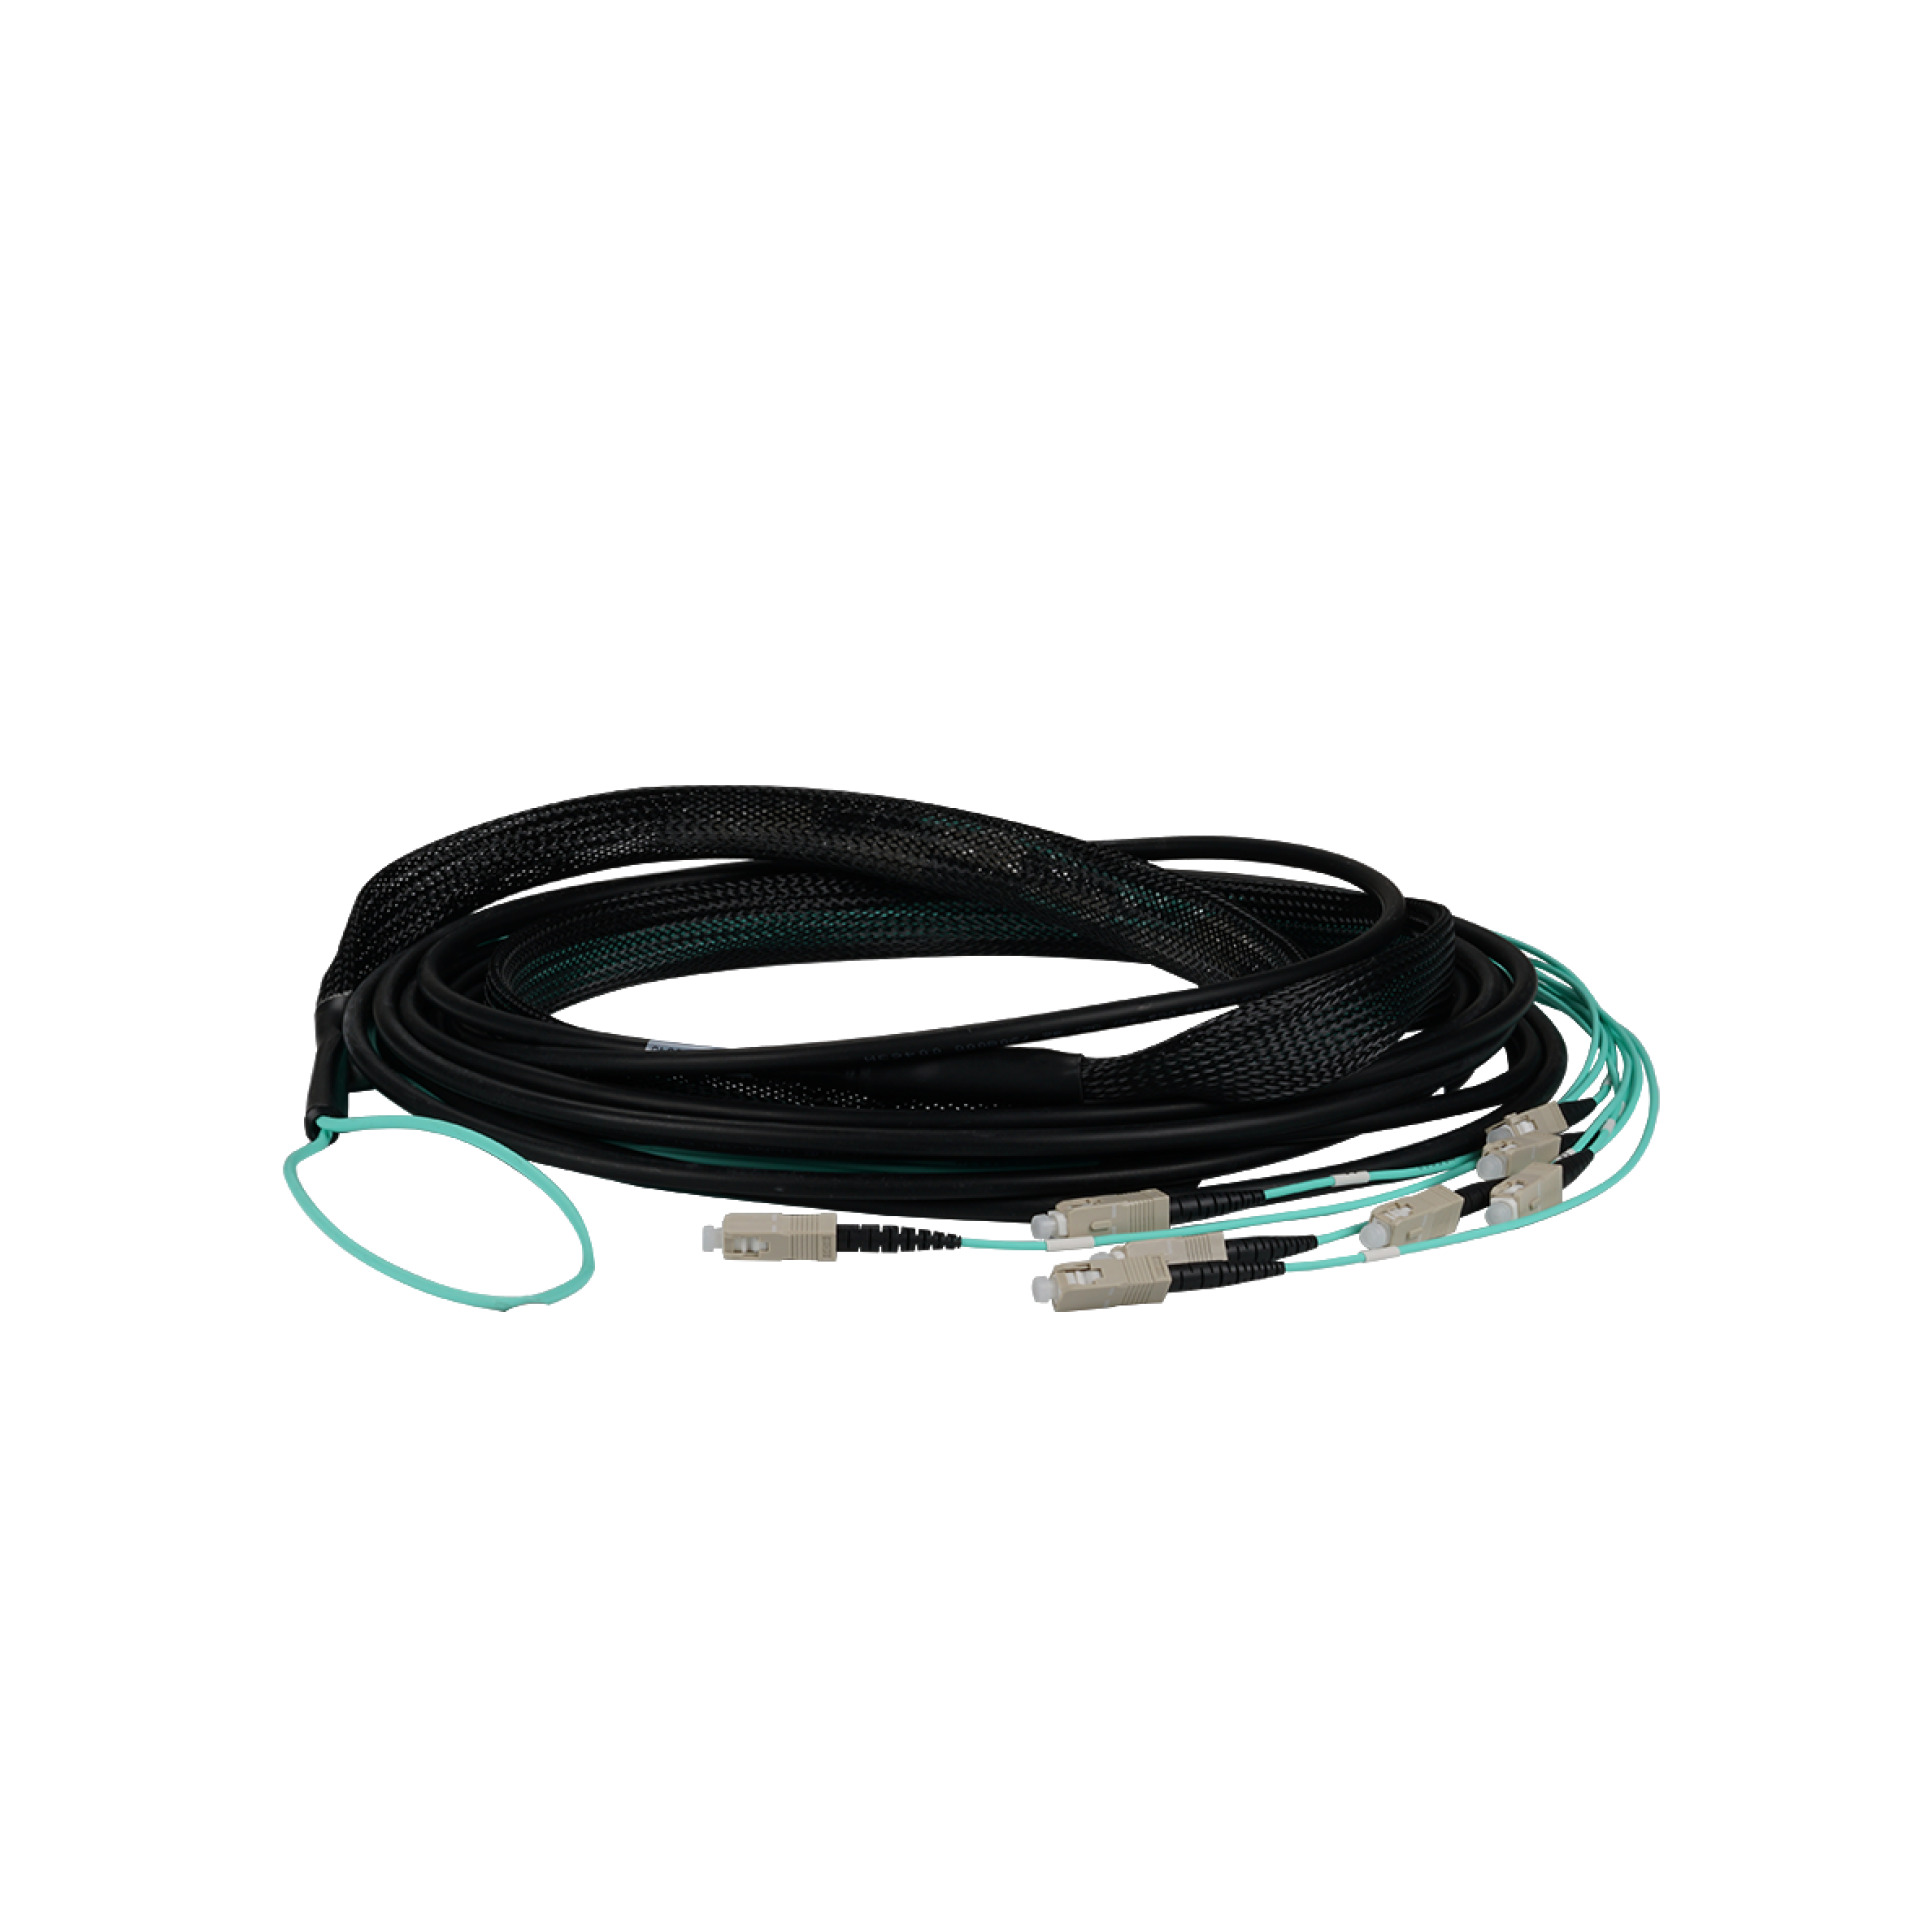 Trunk cable U-DQ(ZN)BH 8G 50/125, SC/SC OM3 100m